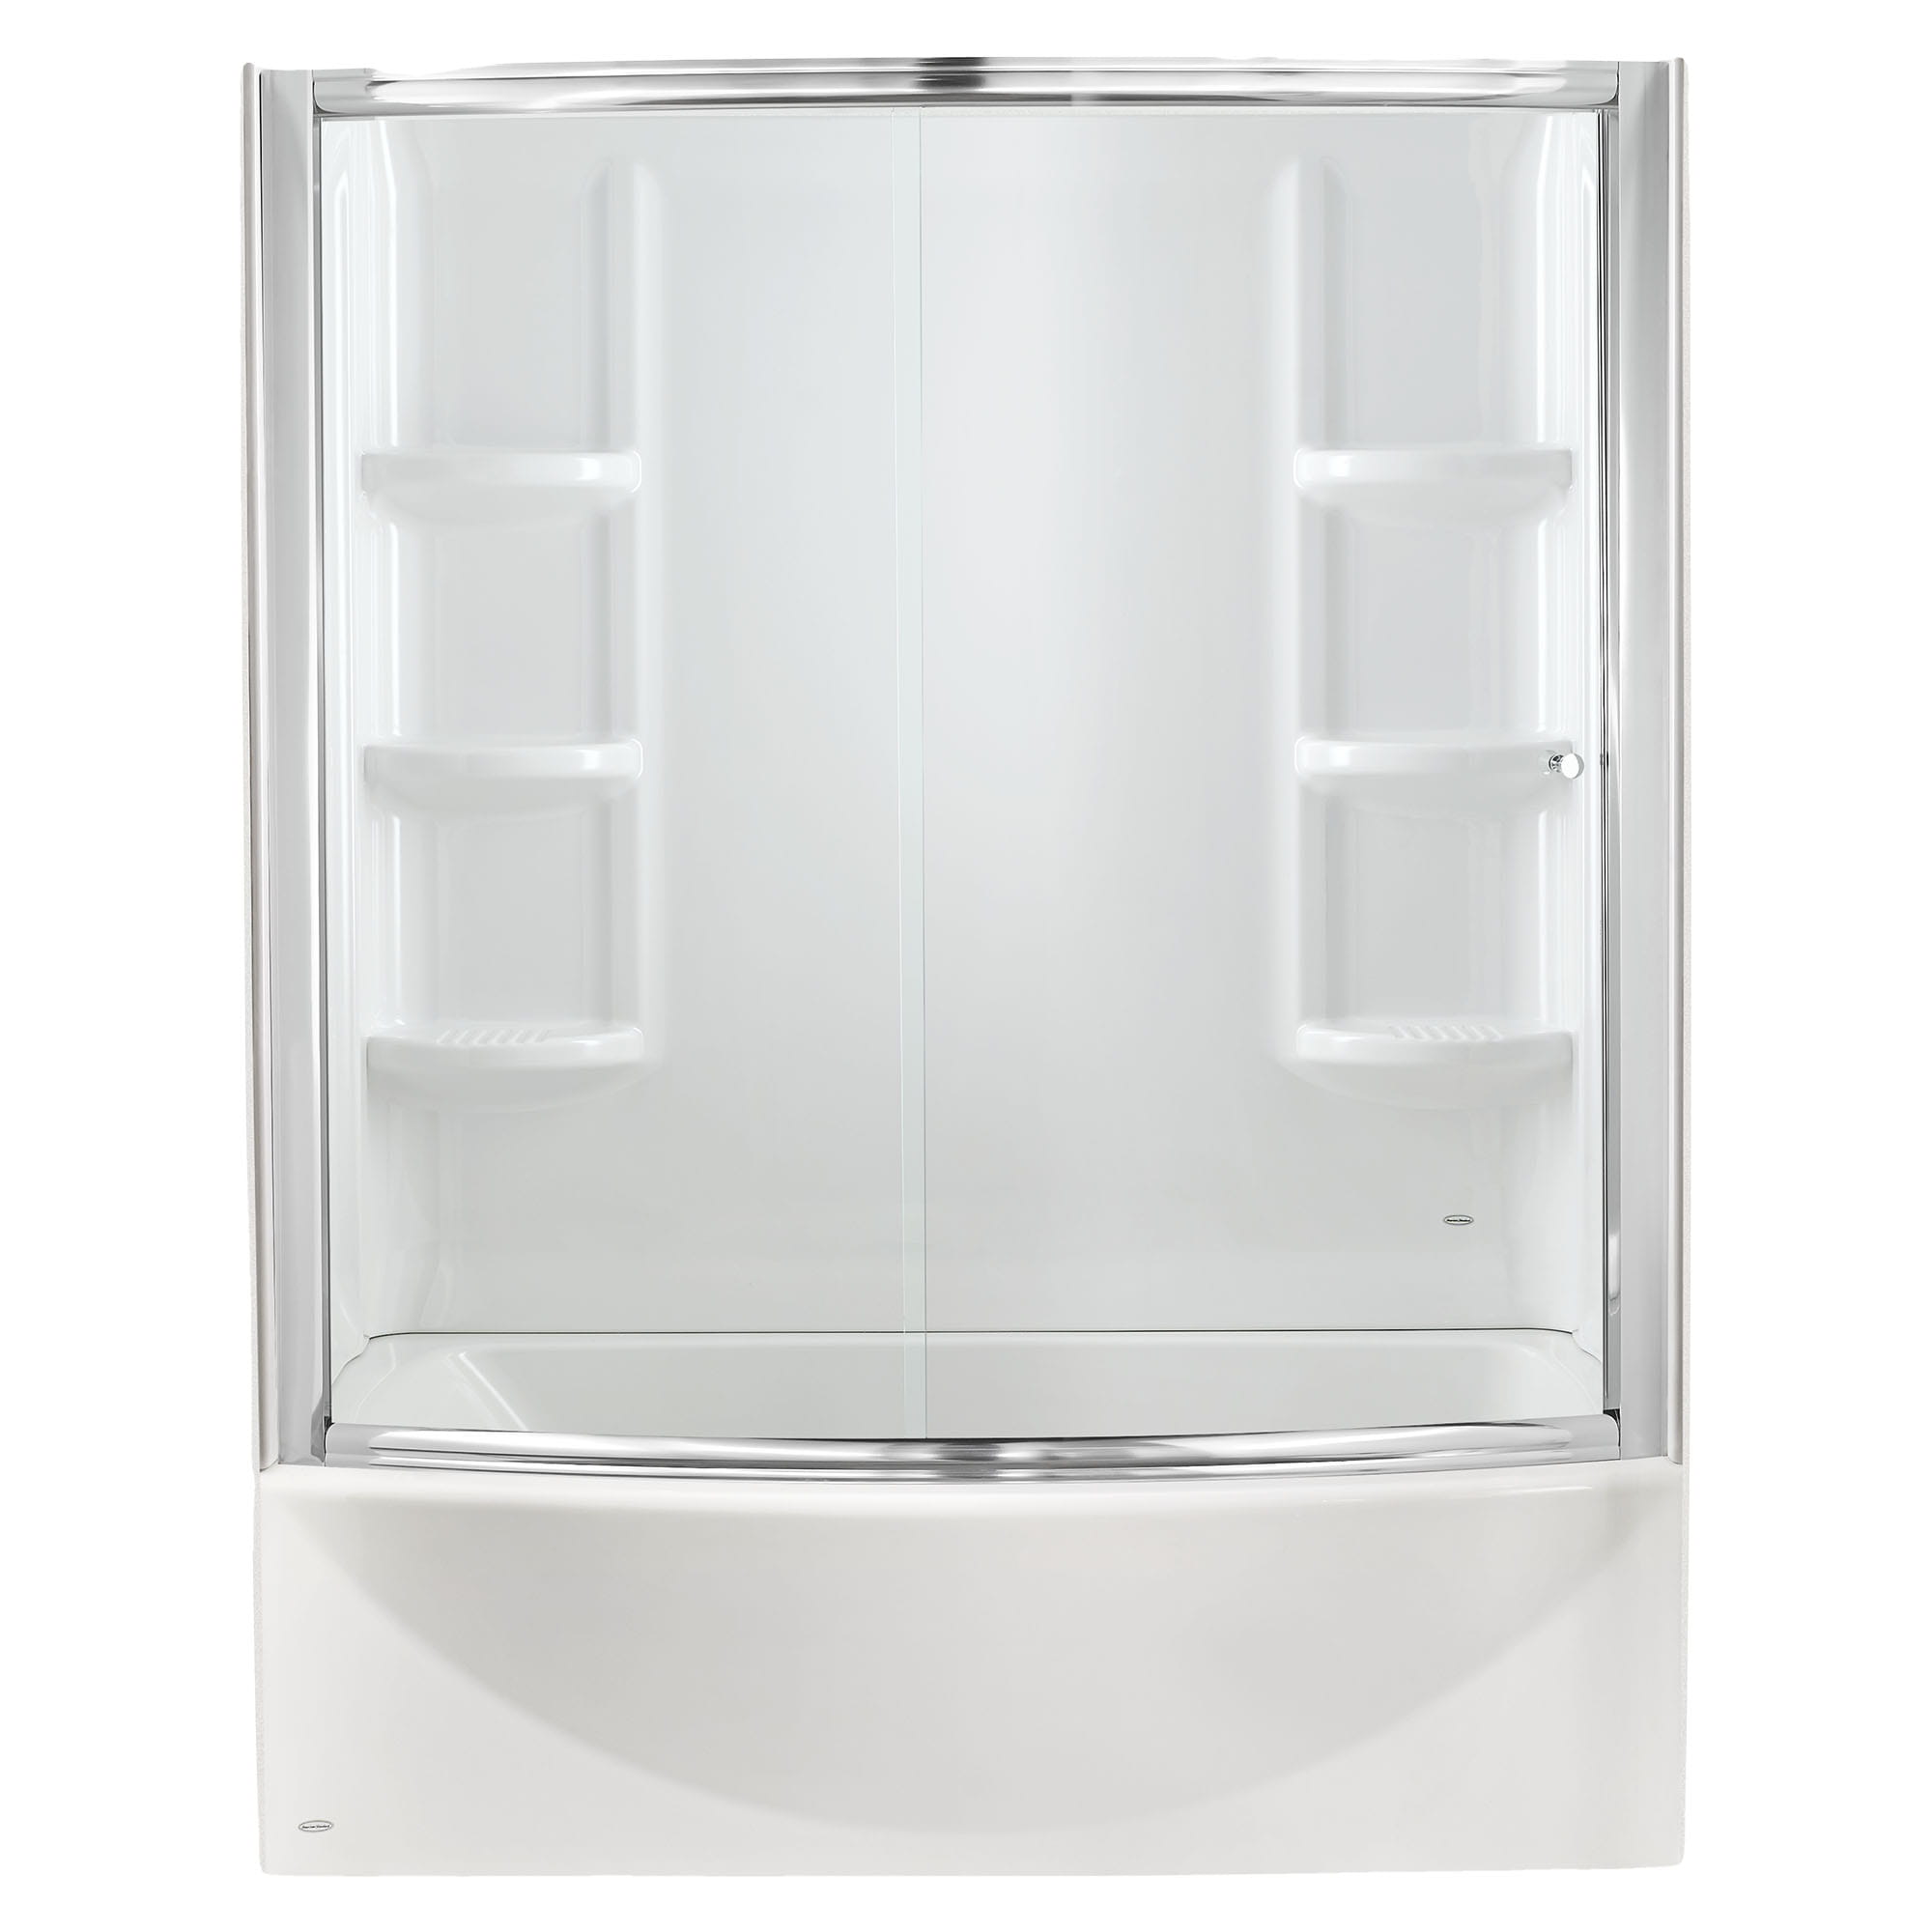 Saver 60" Bypass Tub Door, Clear